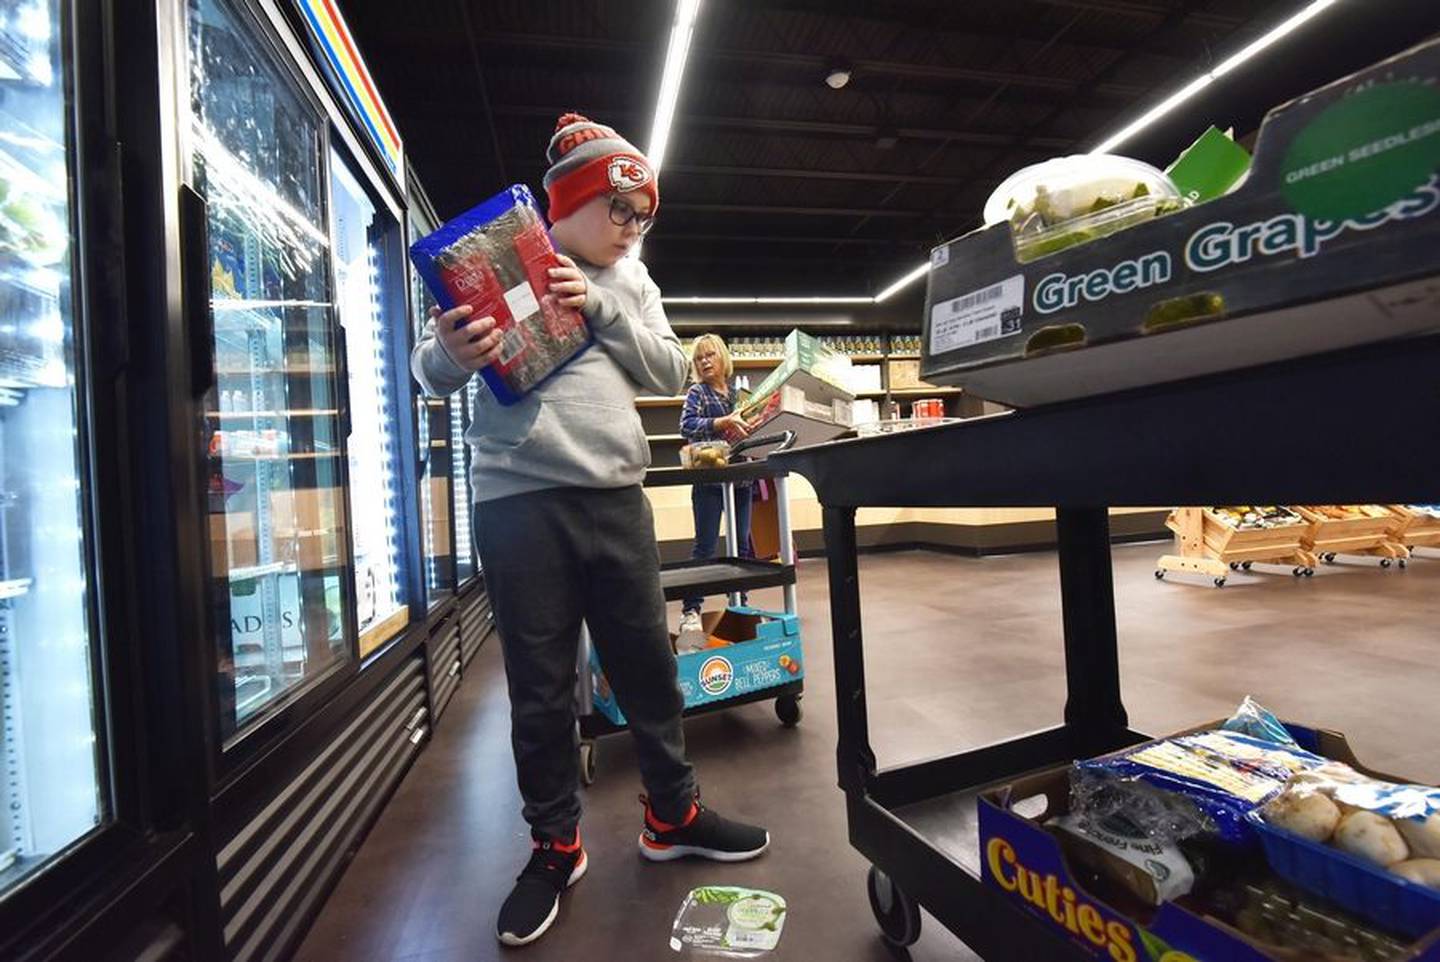 Volunteer Greyson Halley, 10, stocks a refrigerator at the Shepherd's Heart Food Pantry in Geneva. More people are relying on food pantries in the suburbs as grocery store prices increase.